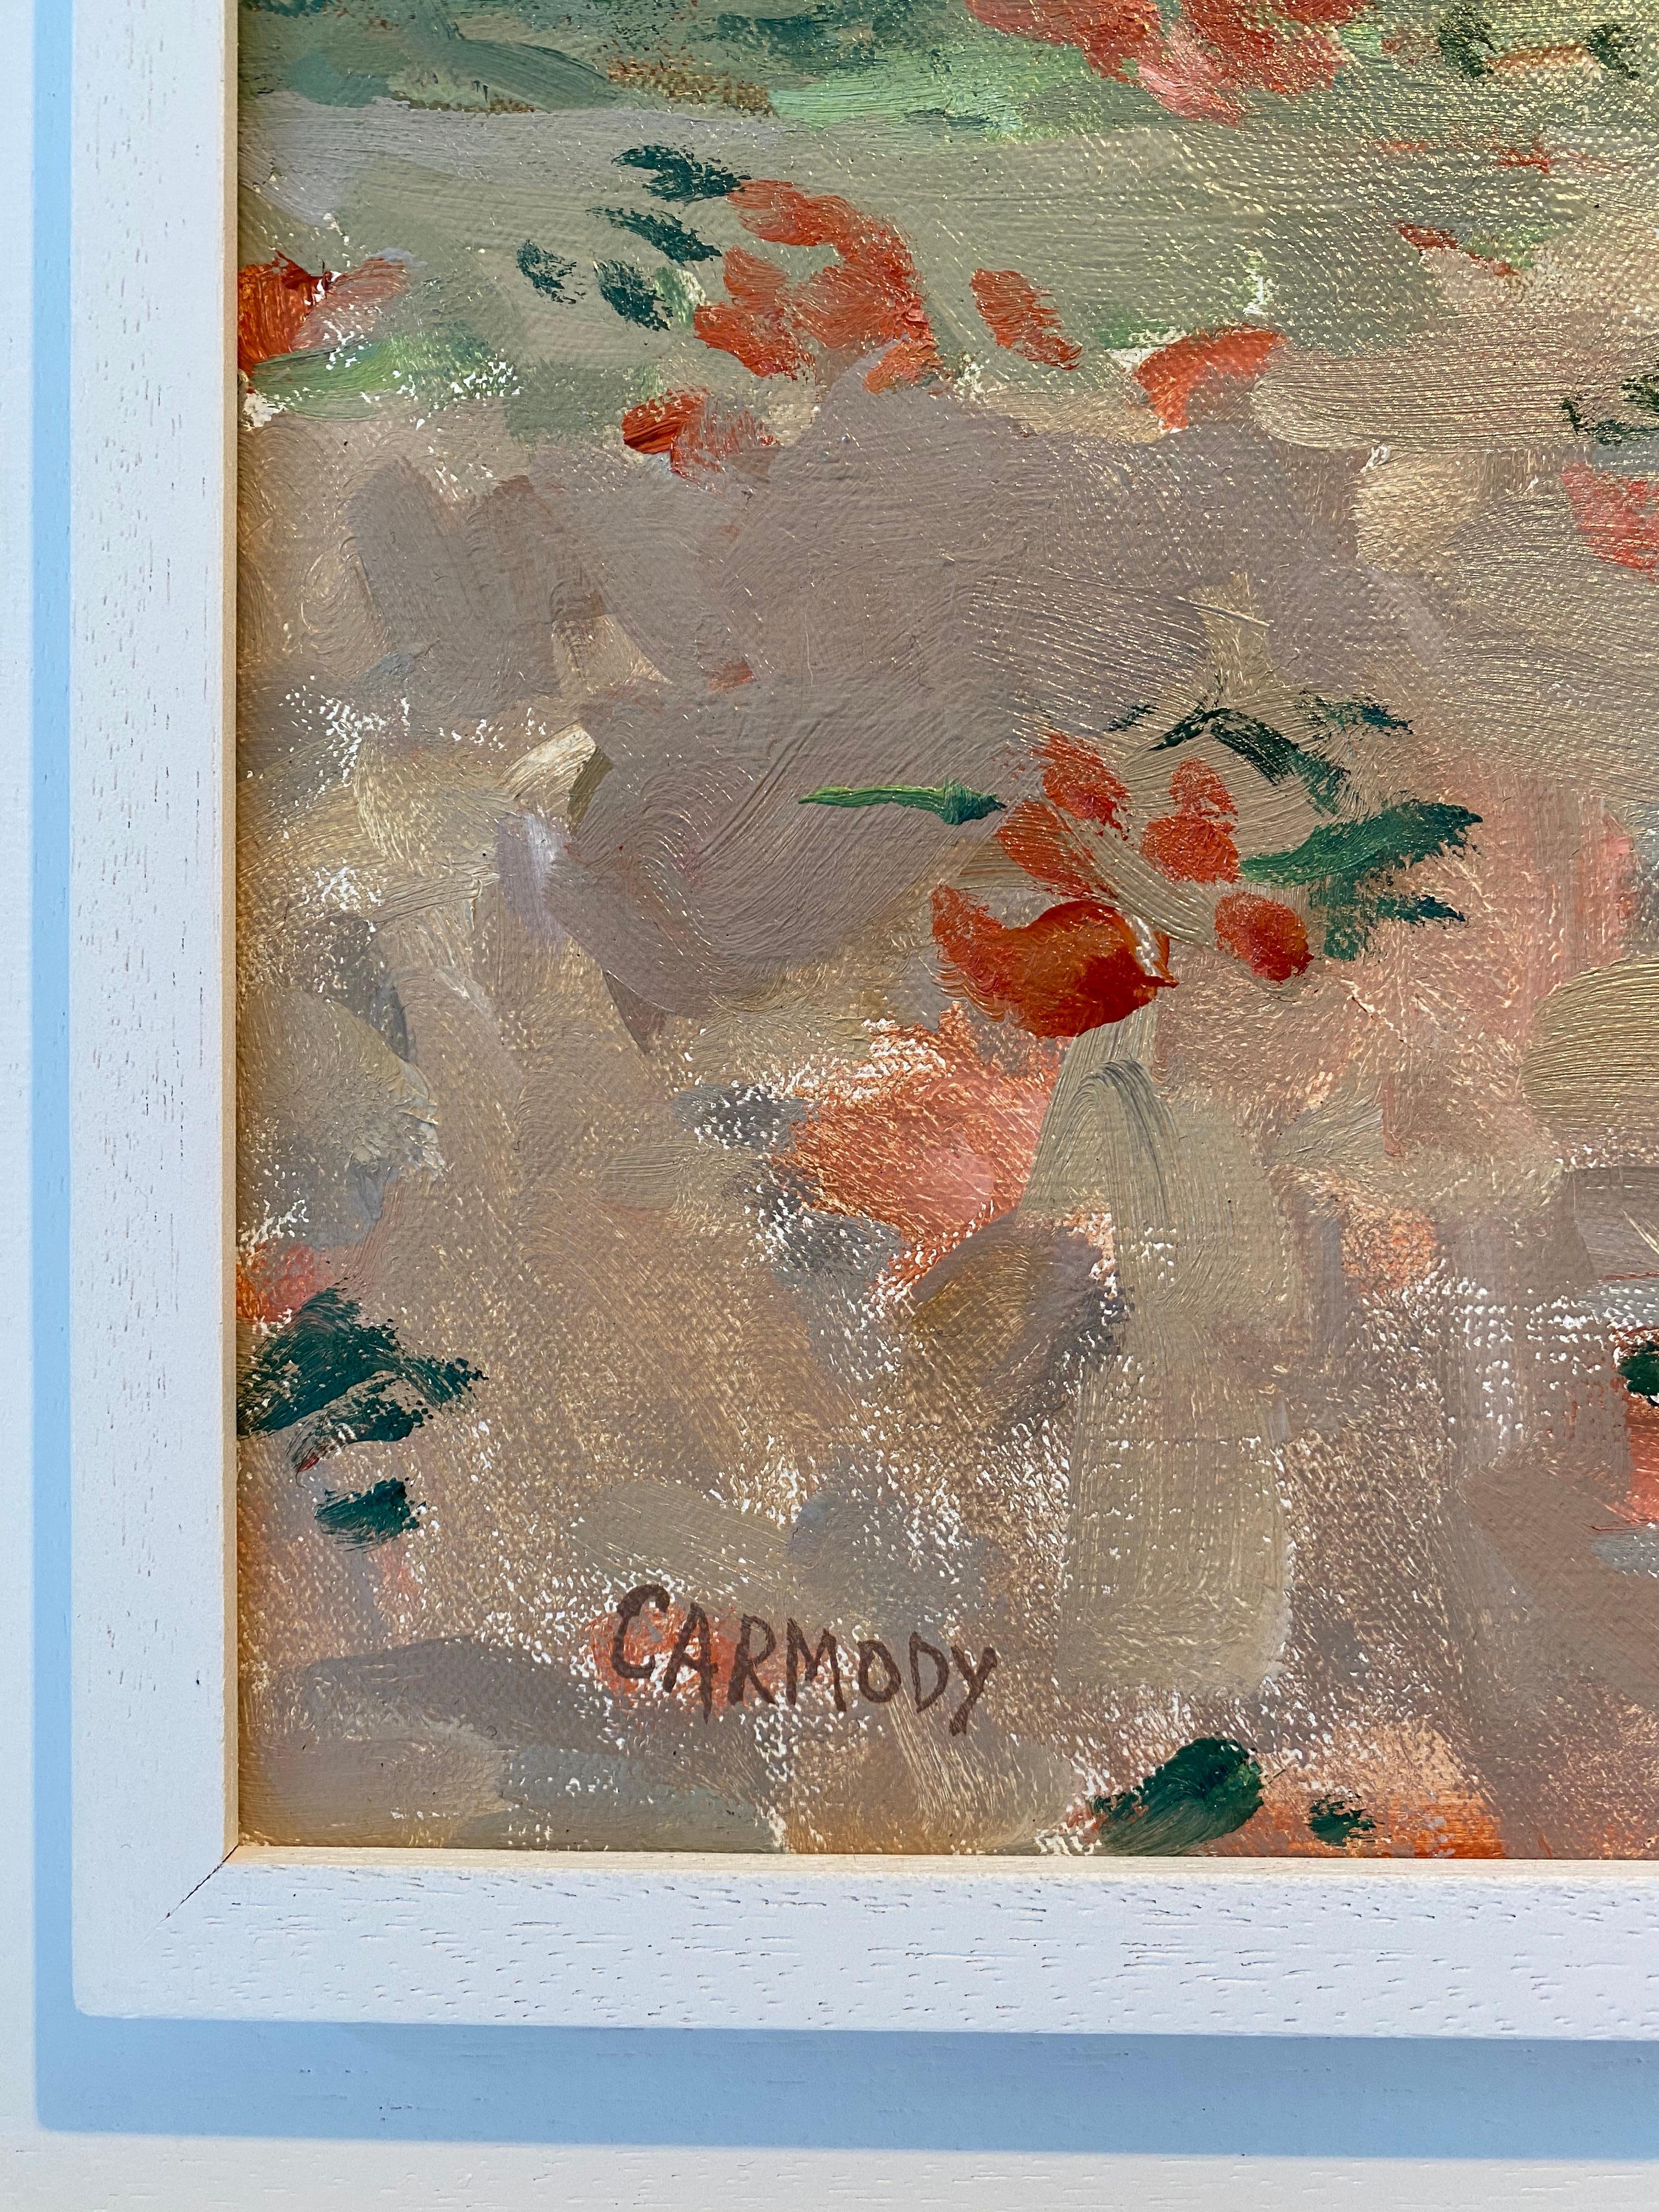 Painted from life while in her studio, a bundle of Orange Roses that Laura Grenning brought to a dinner party just days before. 

Framed dimensions: 30 x 26 inches

Kelly Carmody has exhibited at venues including the Portrait Society of America and